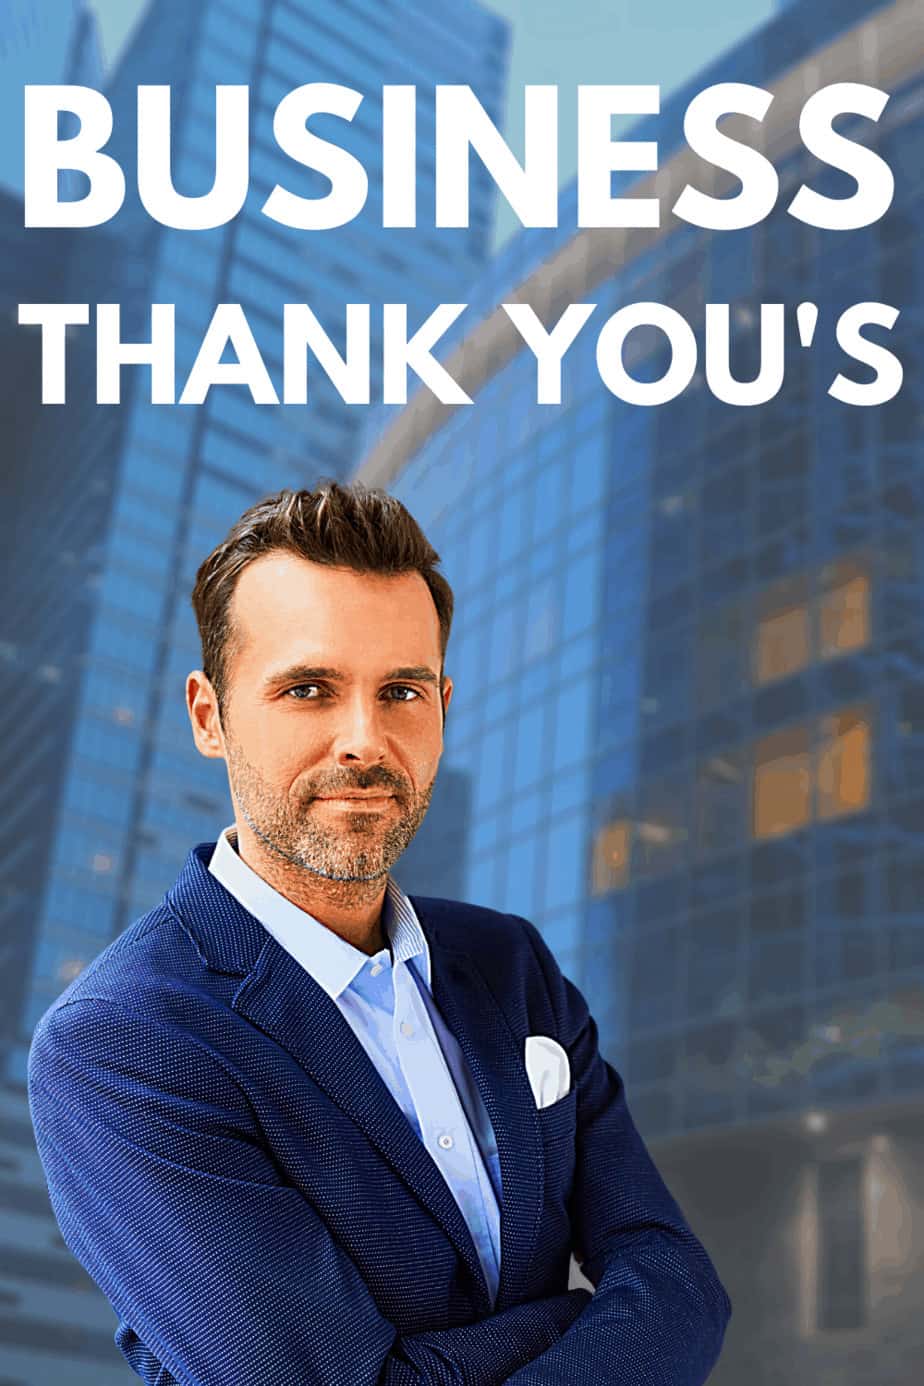 How To Say Thank You in the Business World